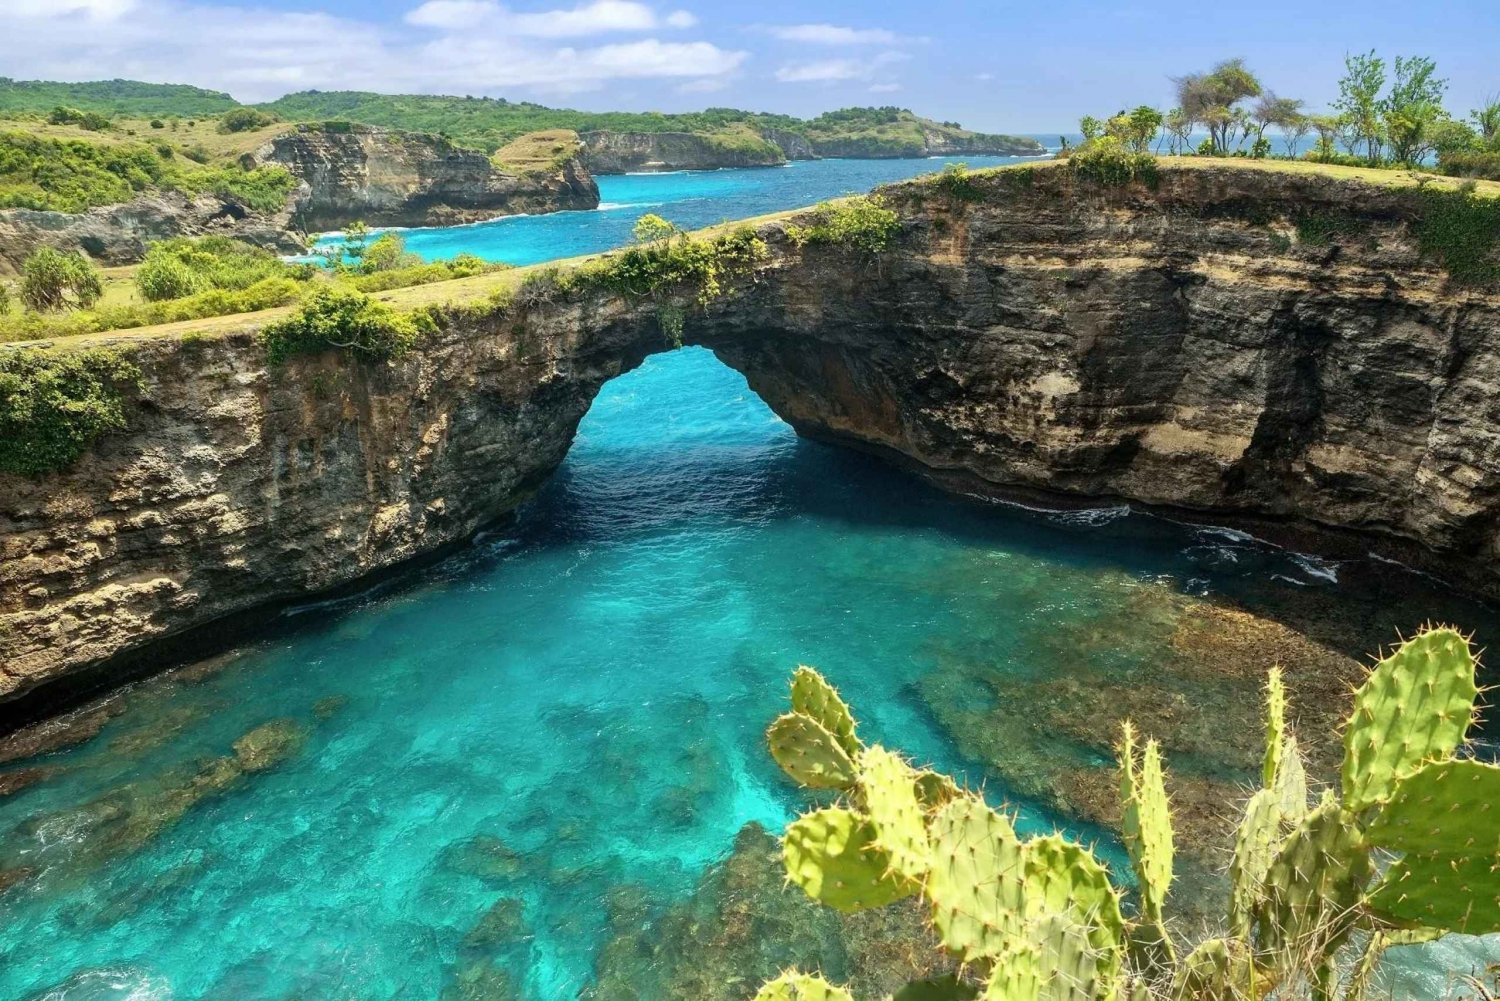 Nusa Penida Full-Day Tour with Transfer from Bali